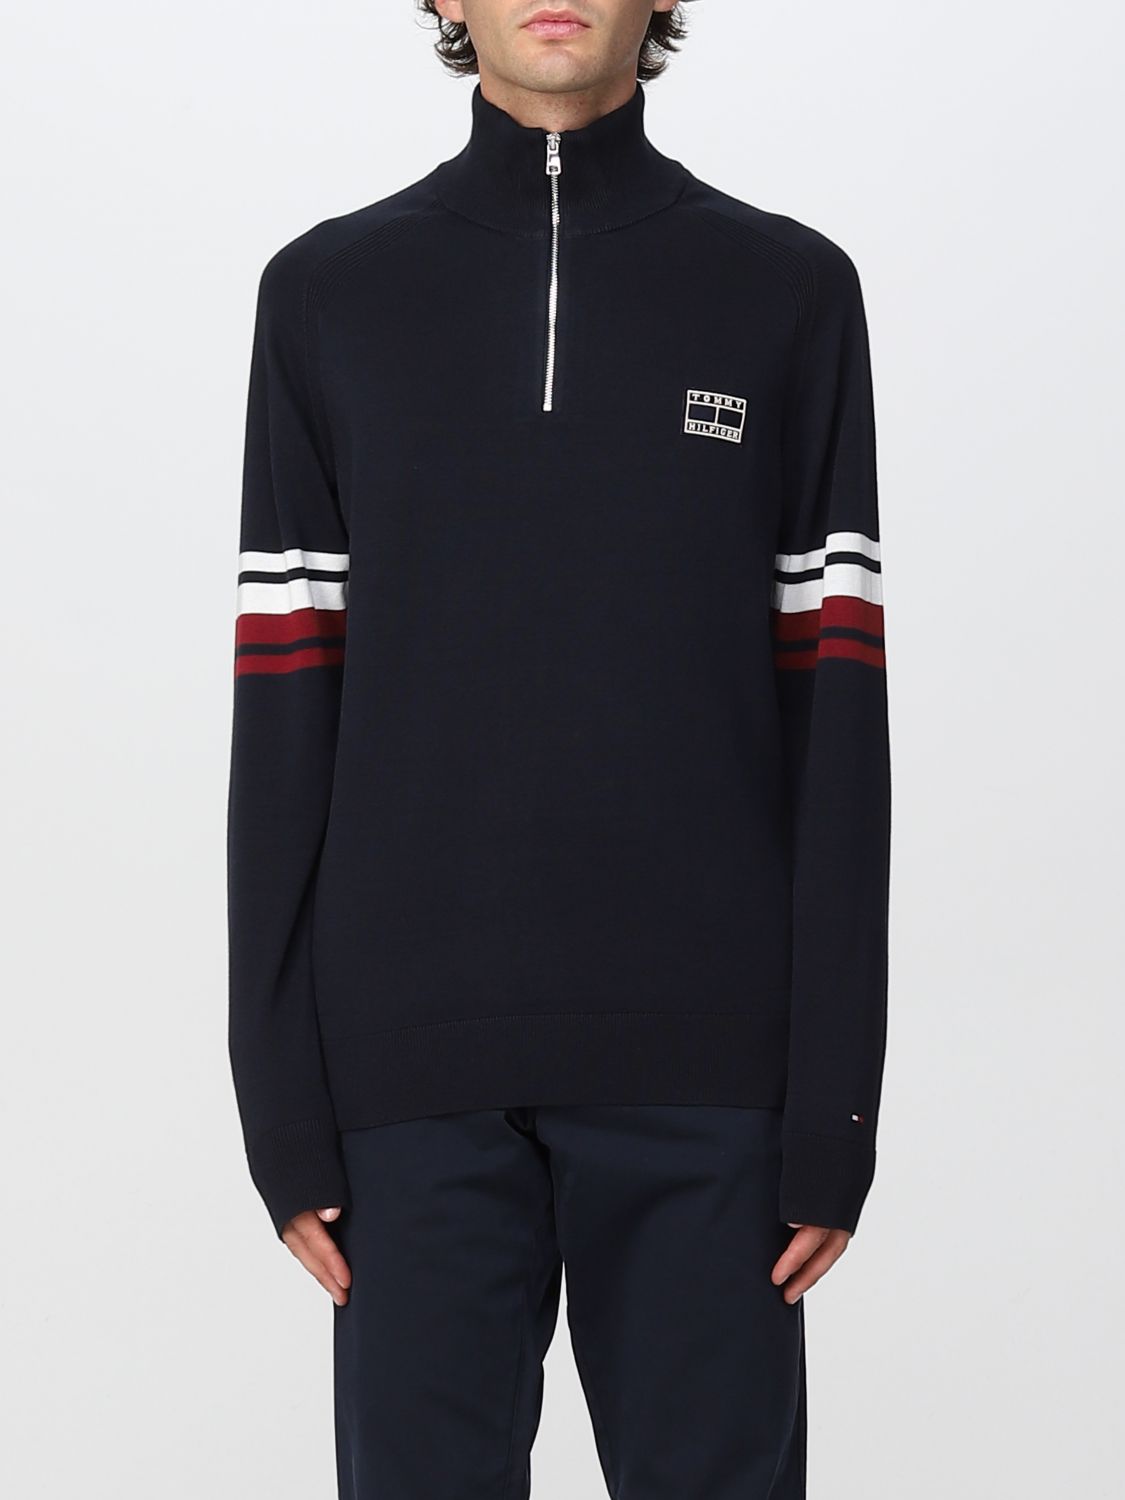 Bestrating Vooruitgang Omleiden Tommy Hilfiger Outlet: zip-up sweater - Blue | Tommy Hilfiger sweater  MW0MW25354 online on GIGLIO.COM